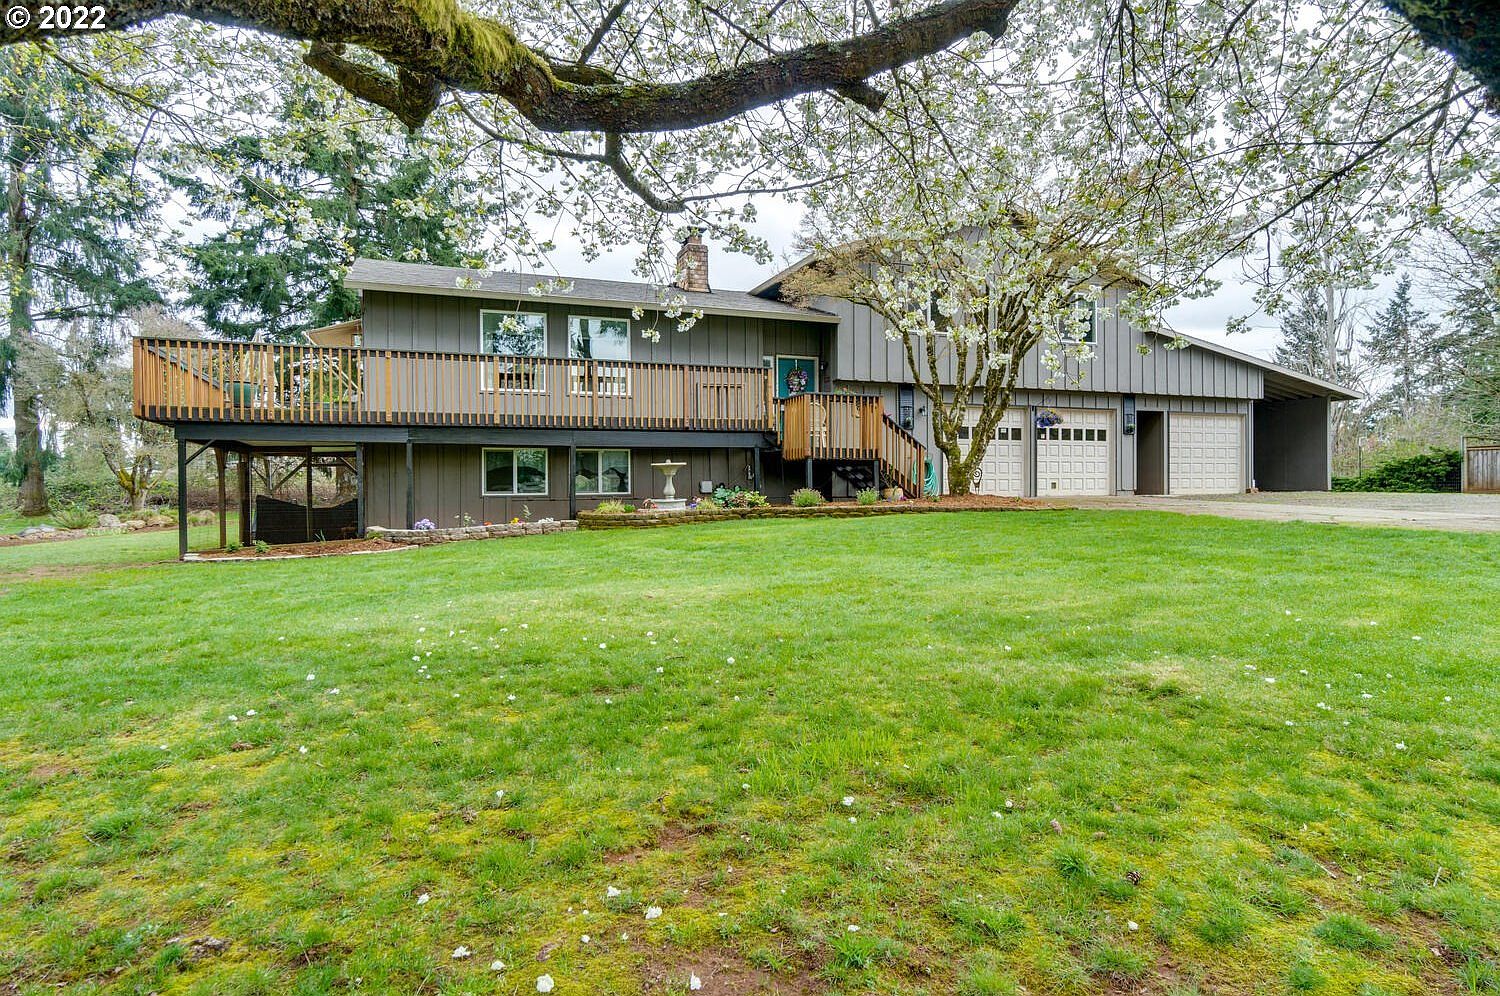 10916 S Beutel Rd, Oregon City, OR 97045 | MLS #22217178 | Zillow